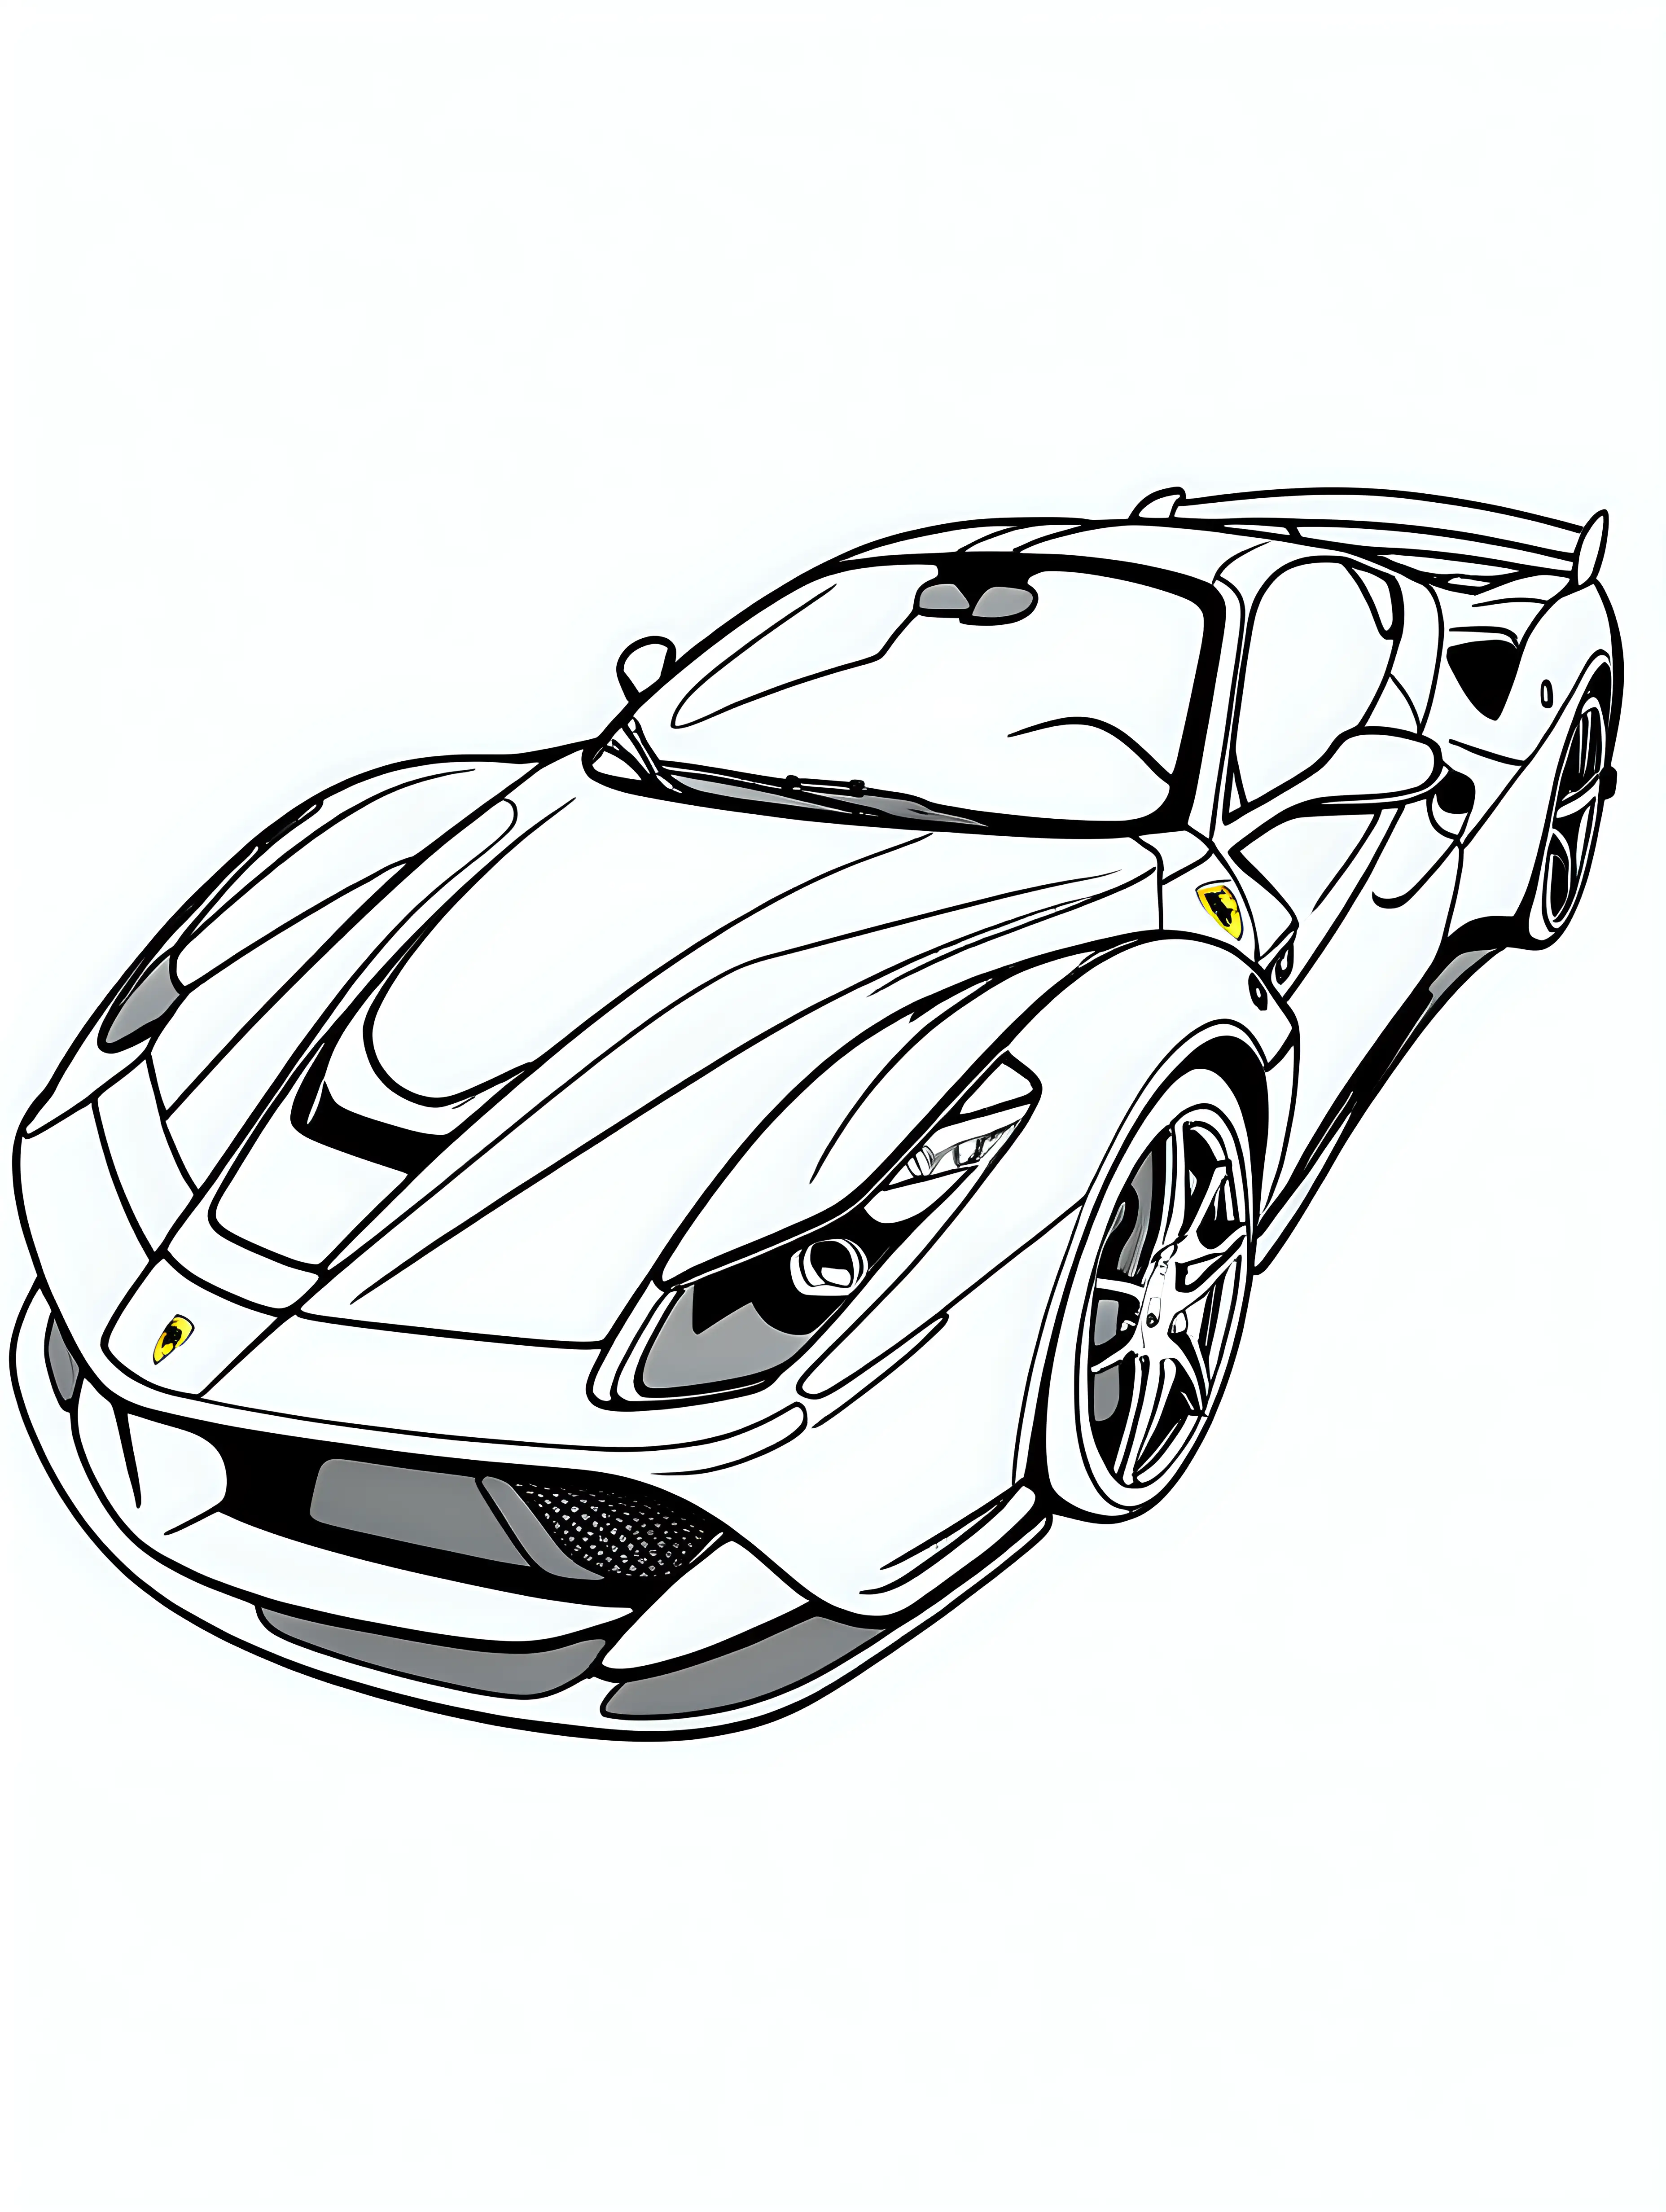 Ferrari Car Coloring Page for Kids